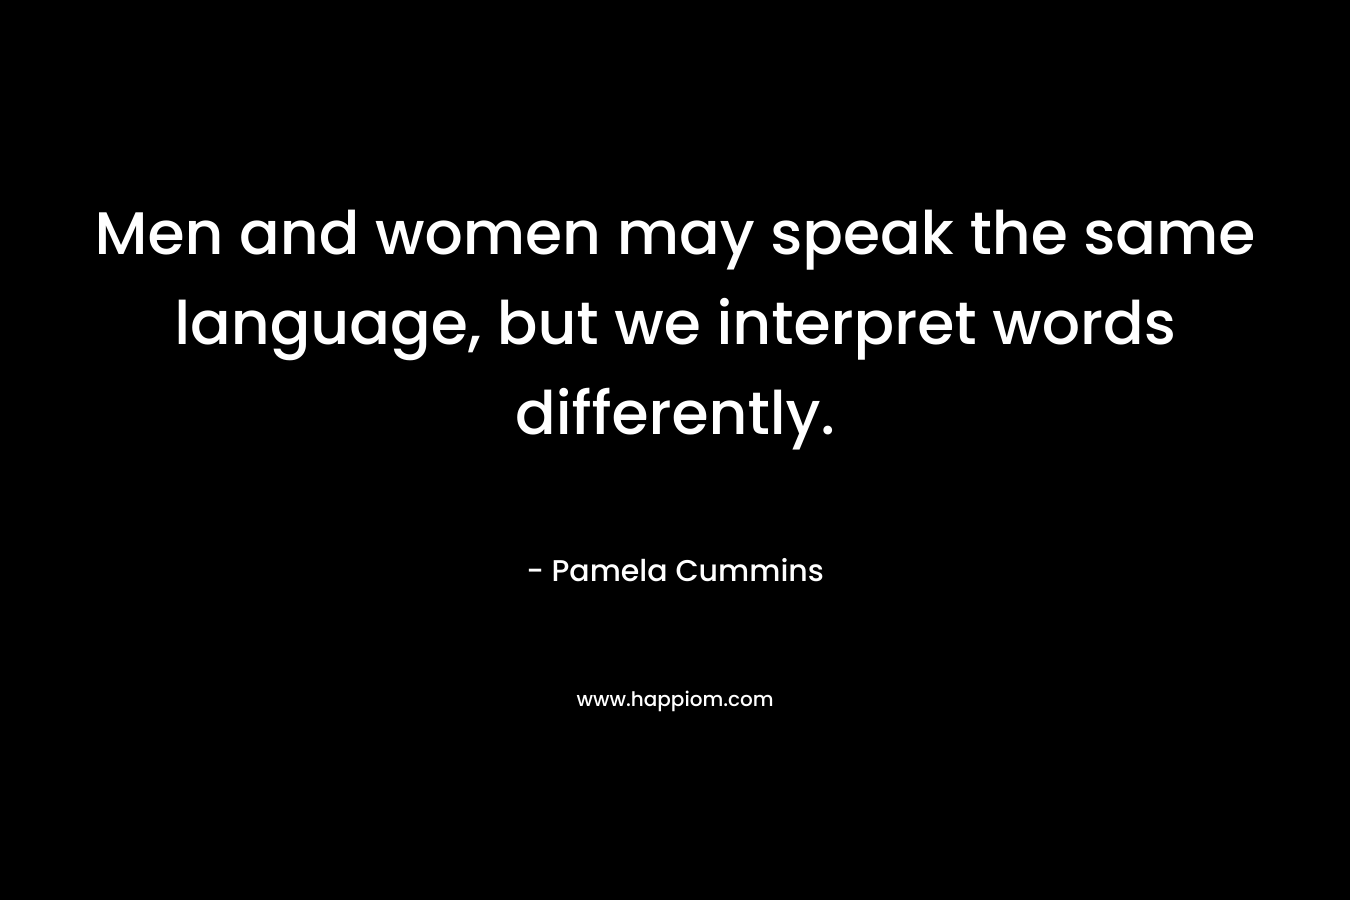 Men and women may speak the same language, but we interpret words differently.